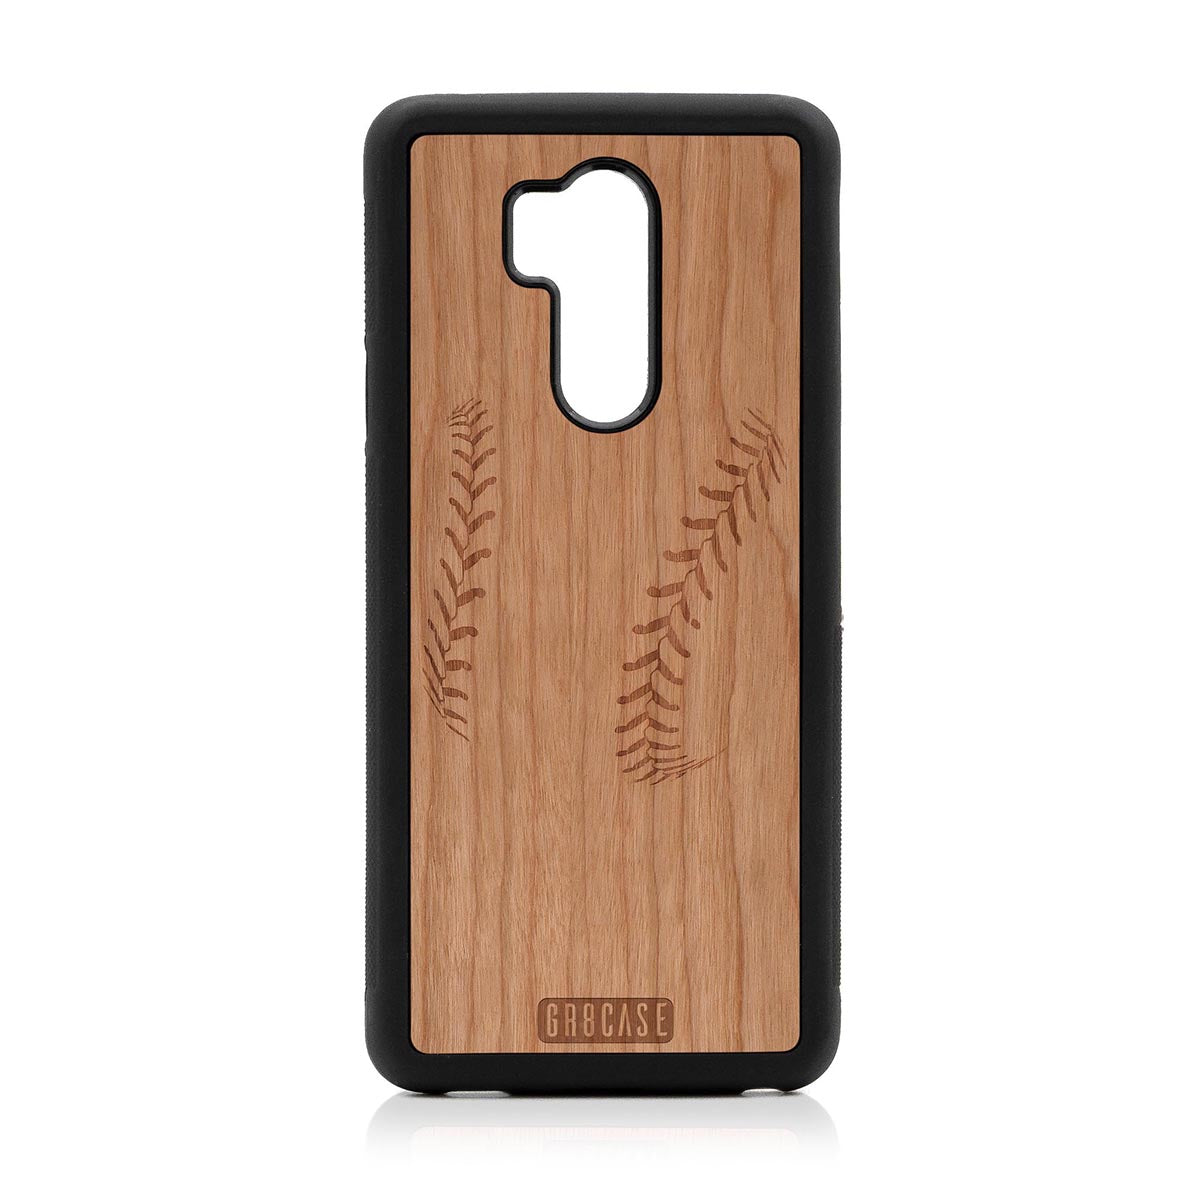 Baseball Stitches Design Wood Case For LG G7 ThinQ by GR8CASE